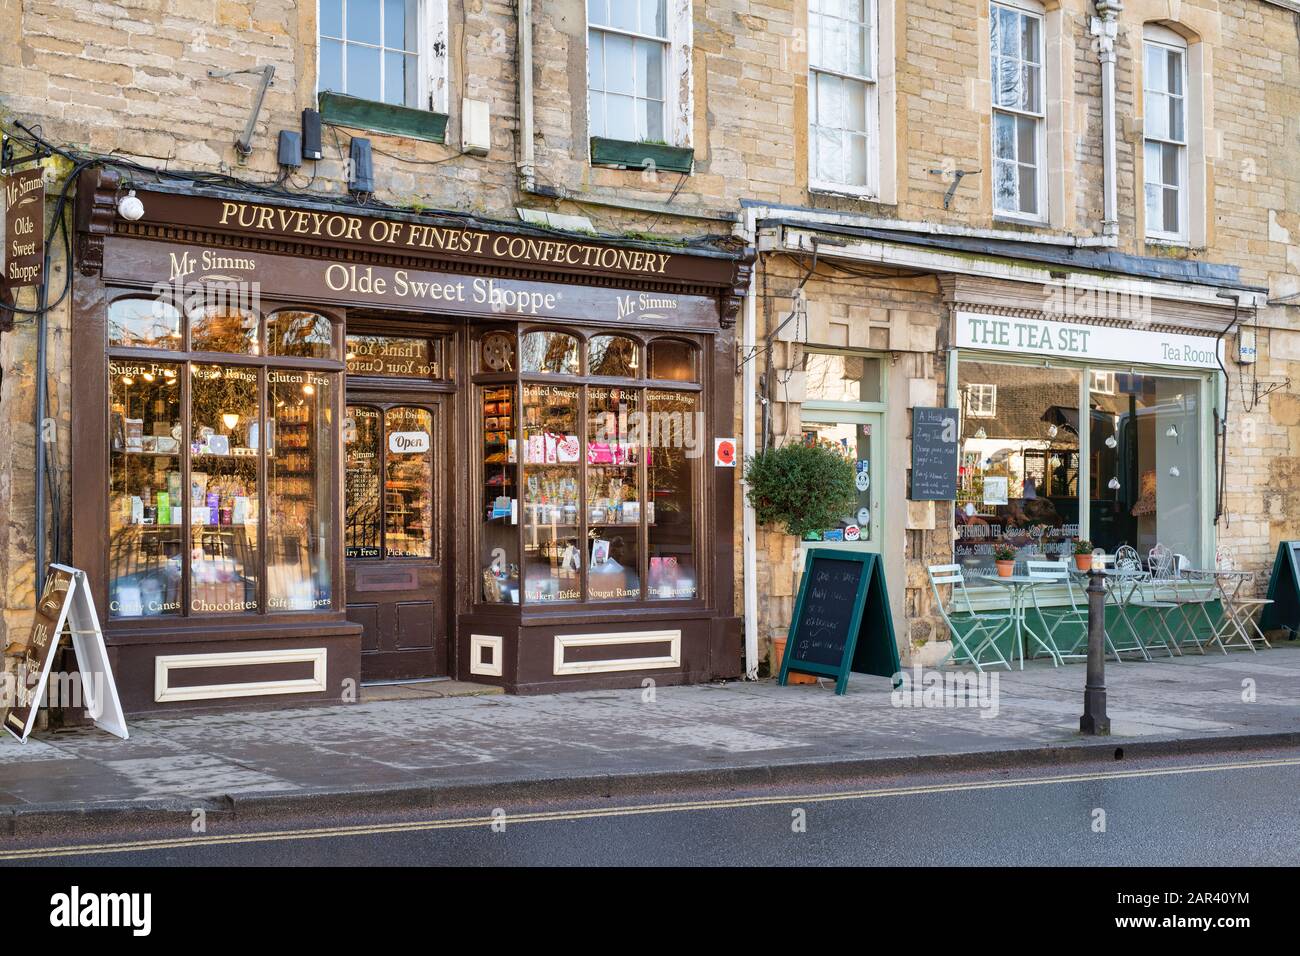 Herr Simms Olde Sweet Shoppe. Old Sweet Shop und Teestube. Chipping Norton, Cotswolds, Oxfordshire, England Stockfoto